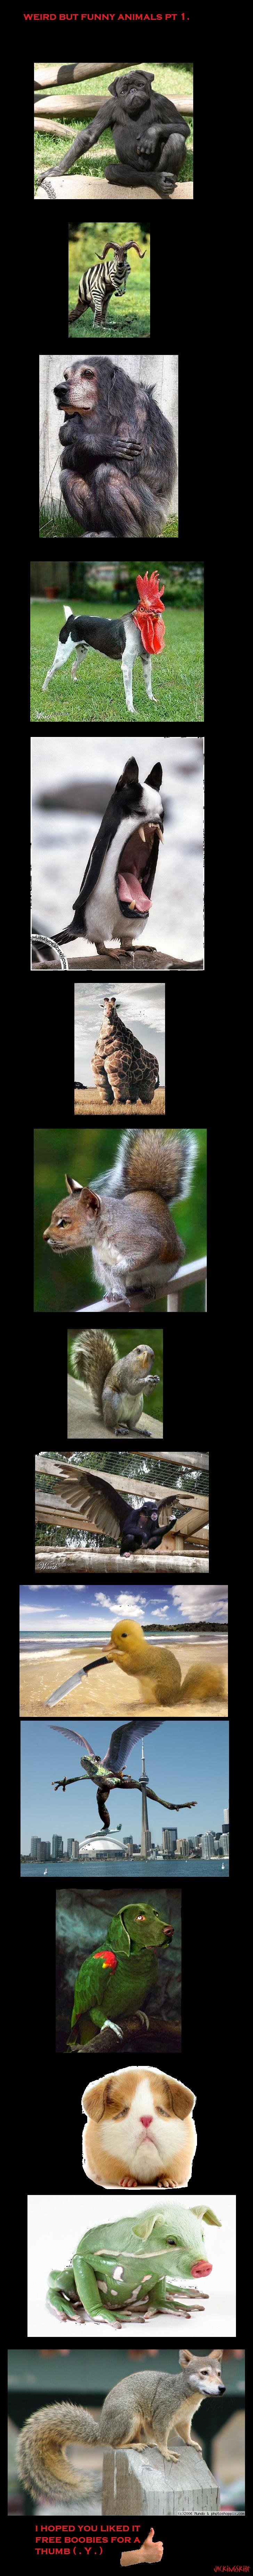 weird but funny animals pt 1.. &lt;a href=&quot;pictures/1215312/old+spice/&quot; target=blank&gt;www.funnyjunk.com/funny_pictures/1215312/old+spice/&lt;/a&gt;&